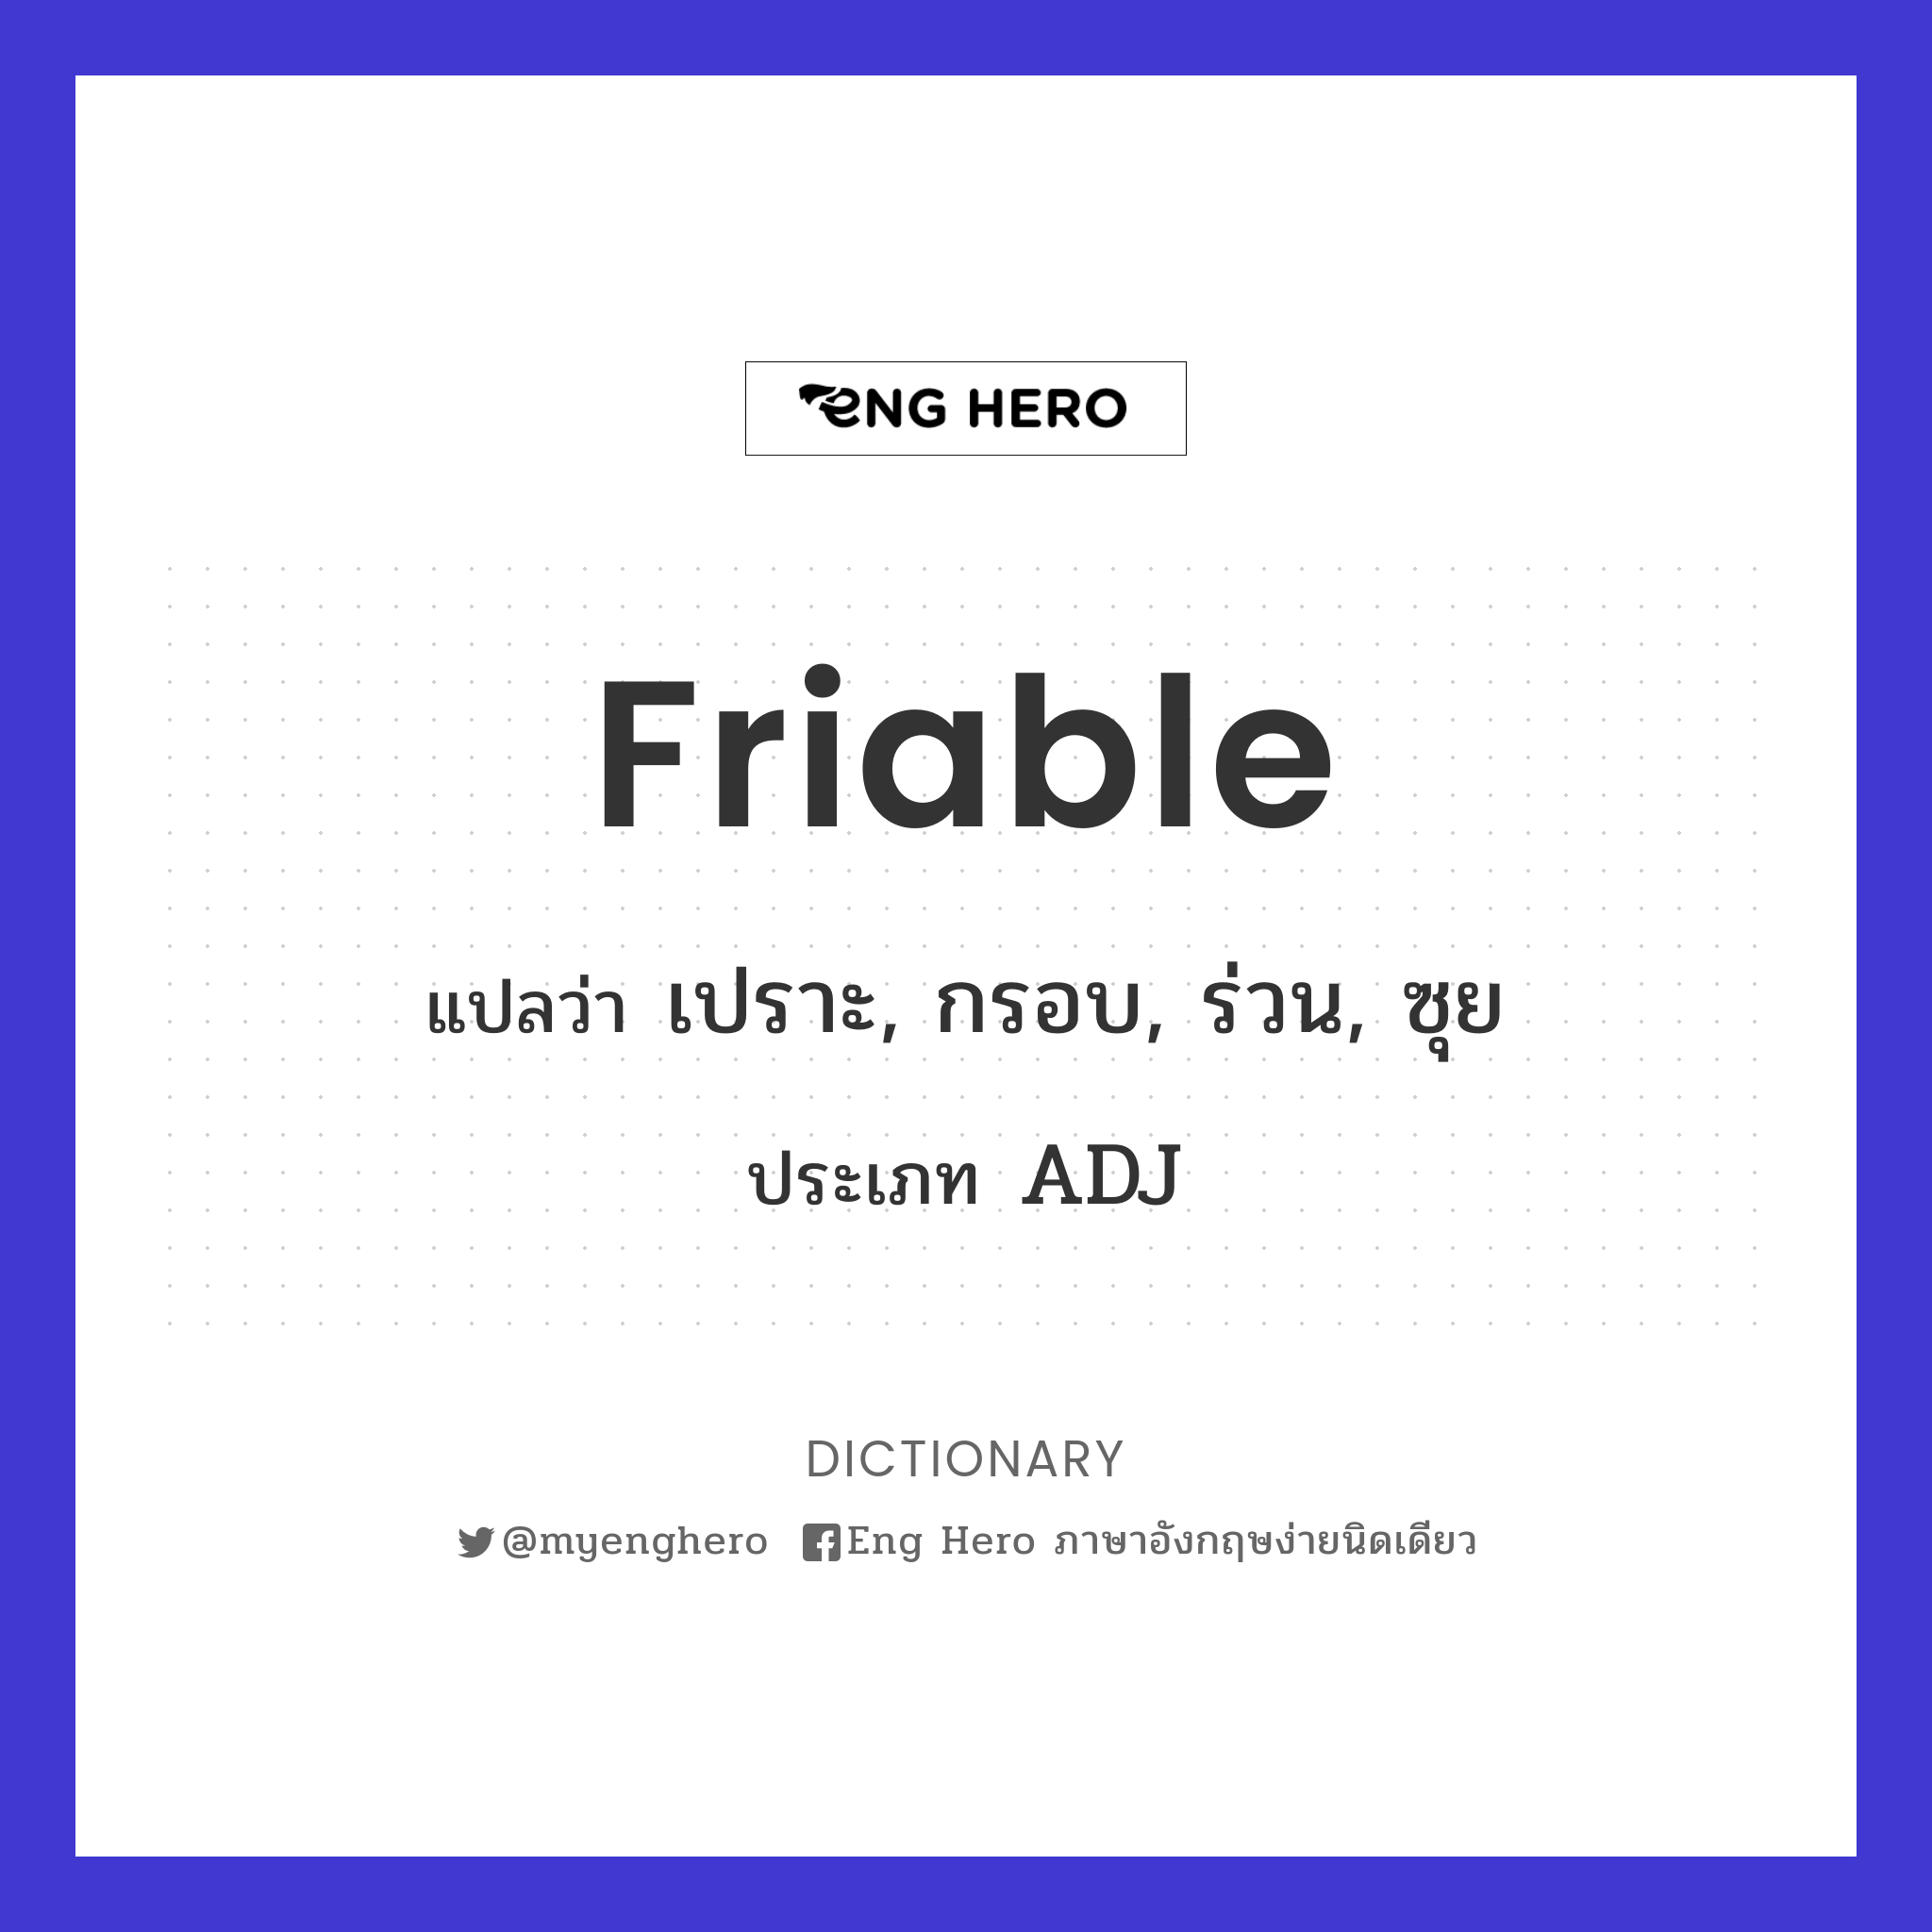 friable